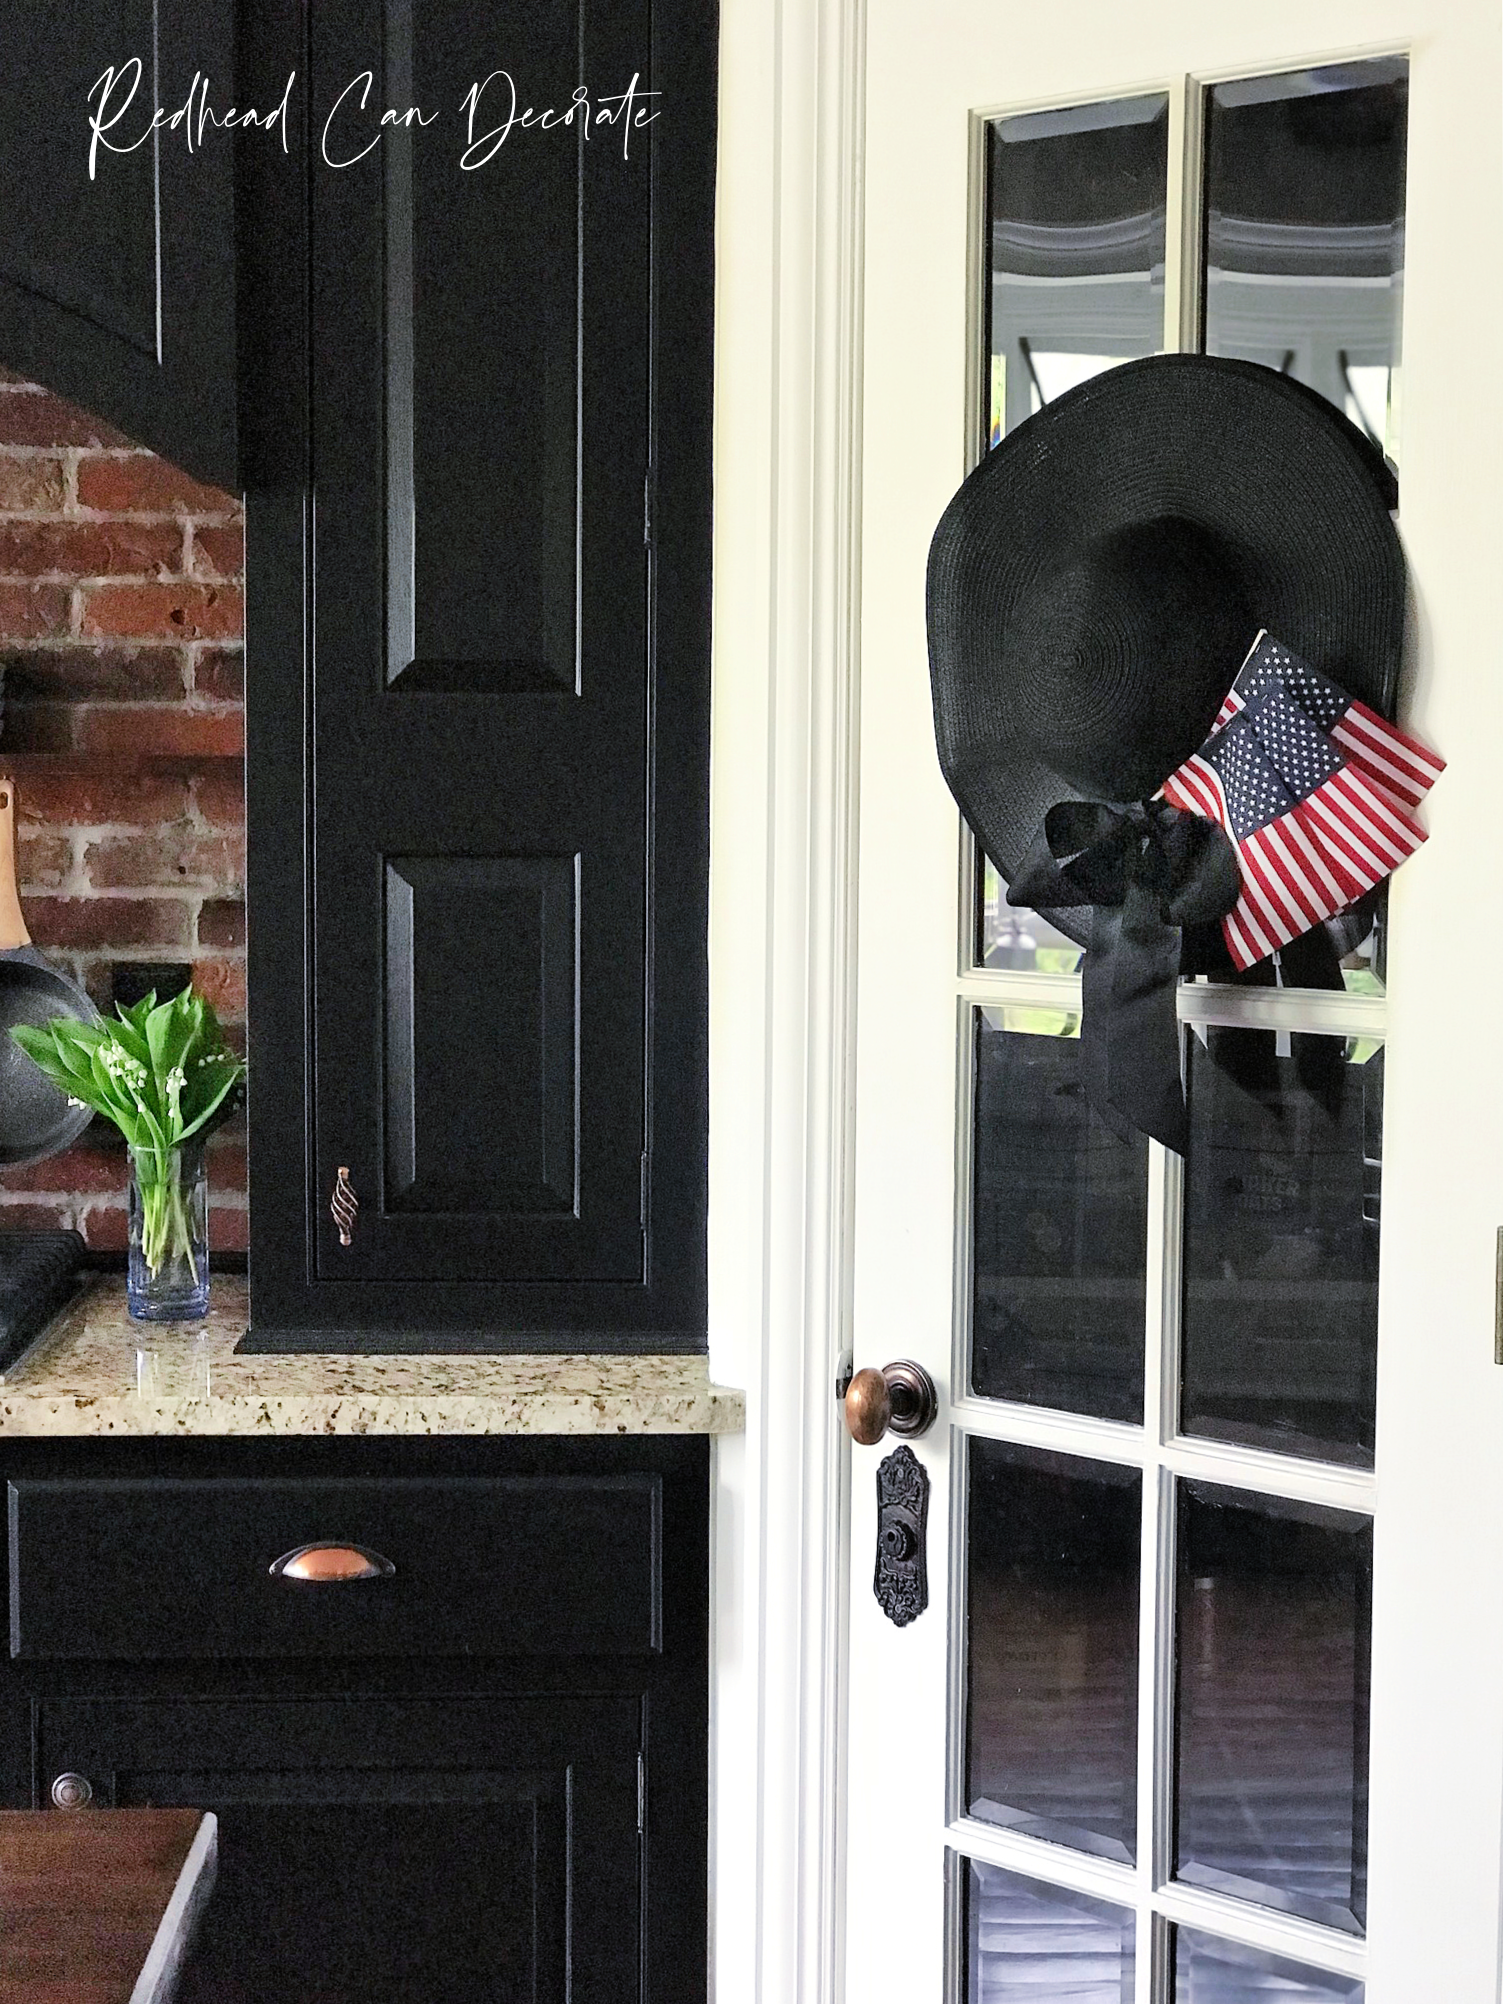 How to Create a Simple Patriotic Beach Hat Wreath